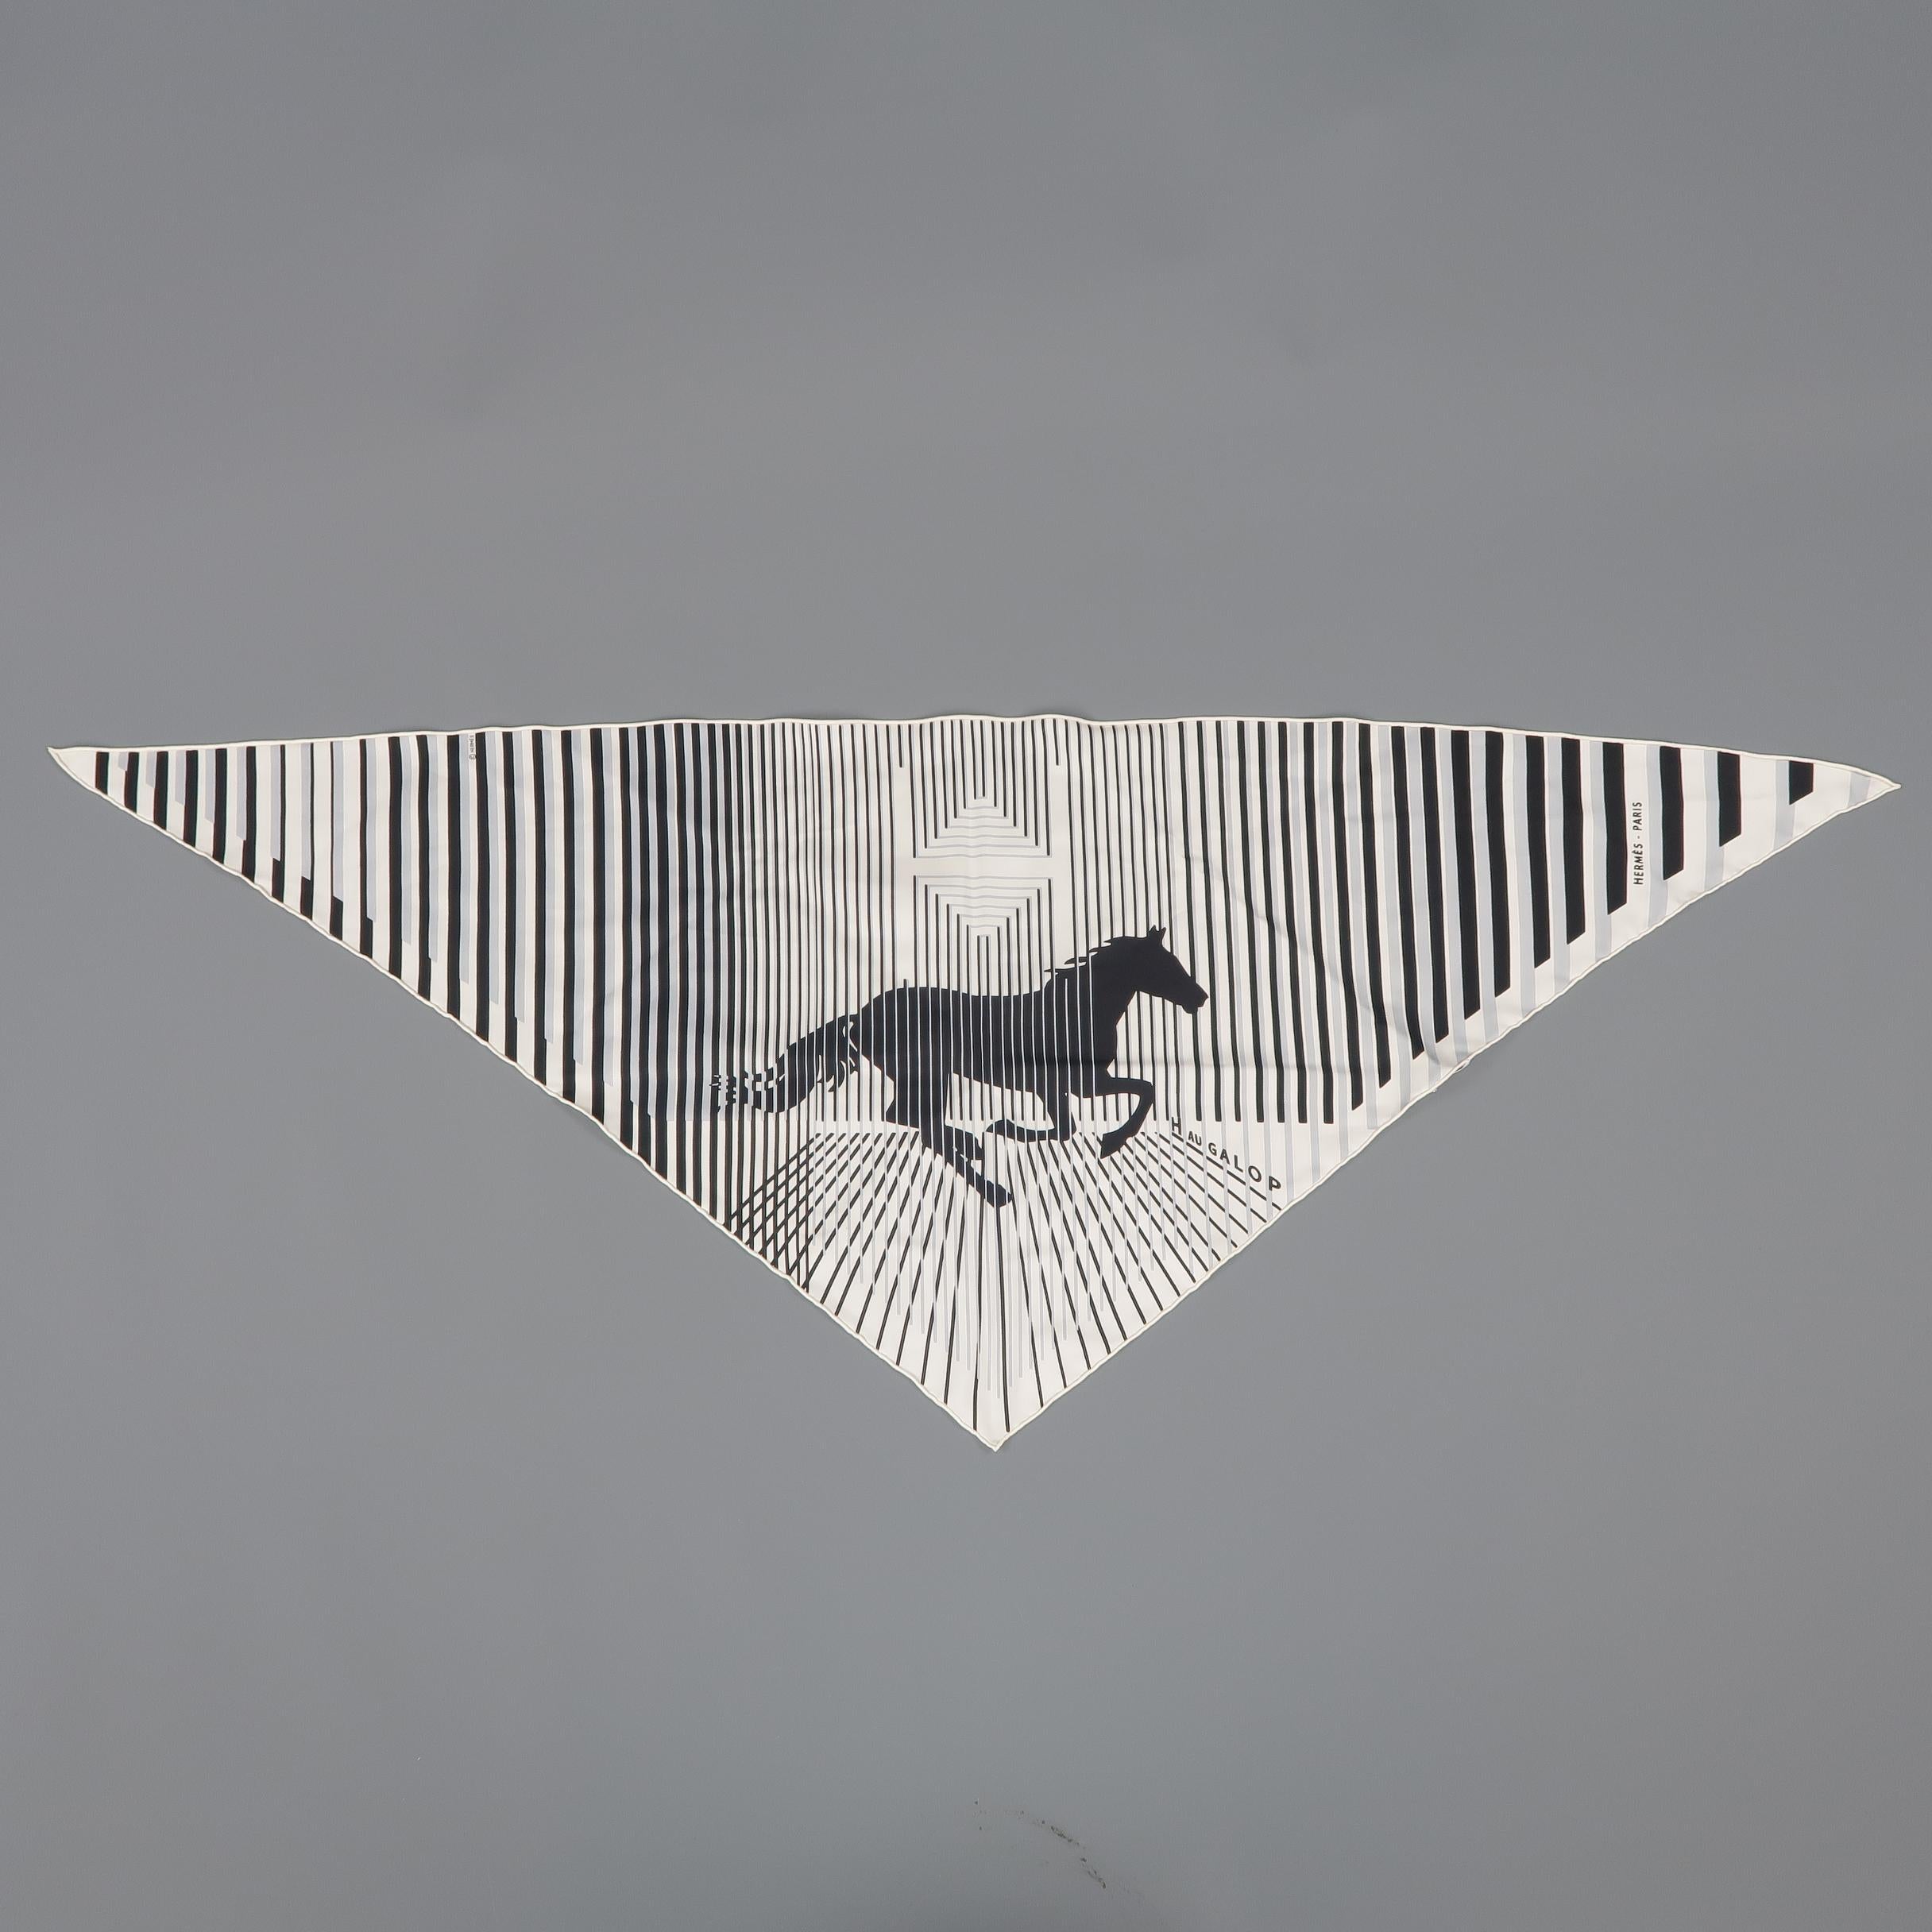 HERMES triangle scarf comes in black and white silk twill with an all over 